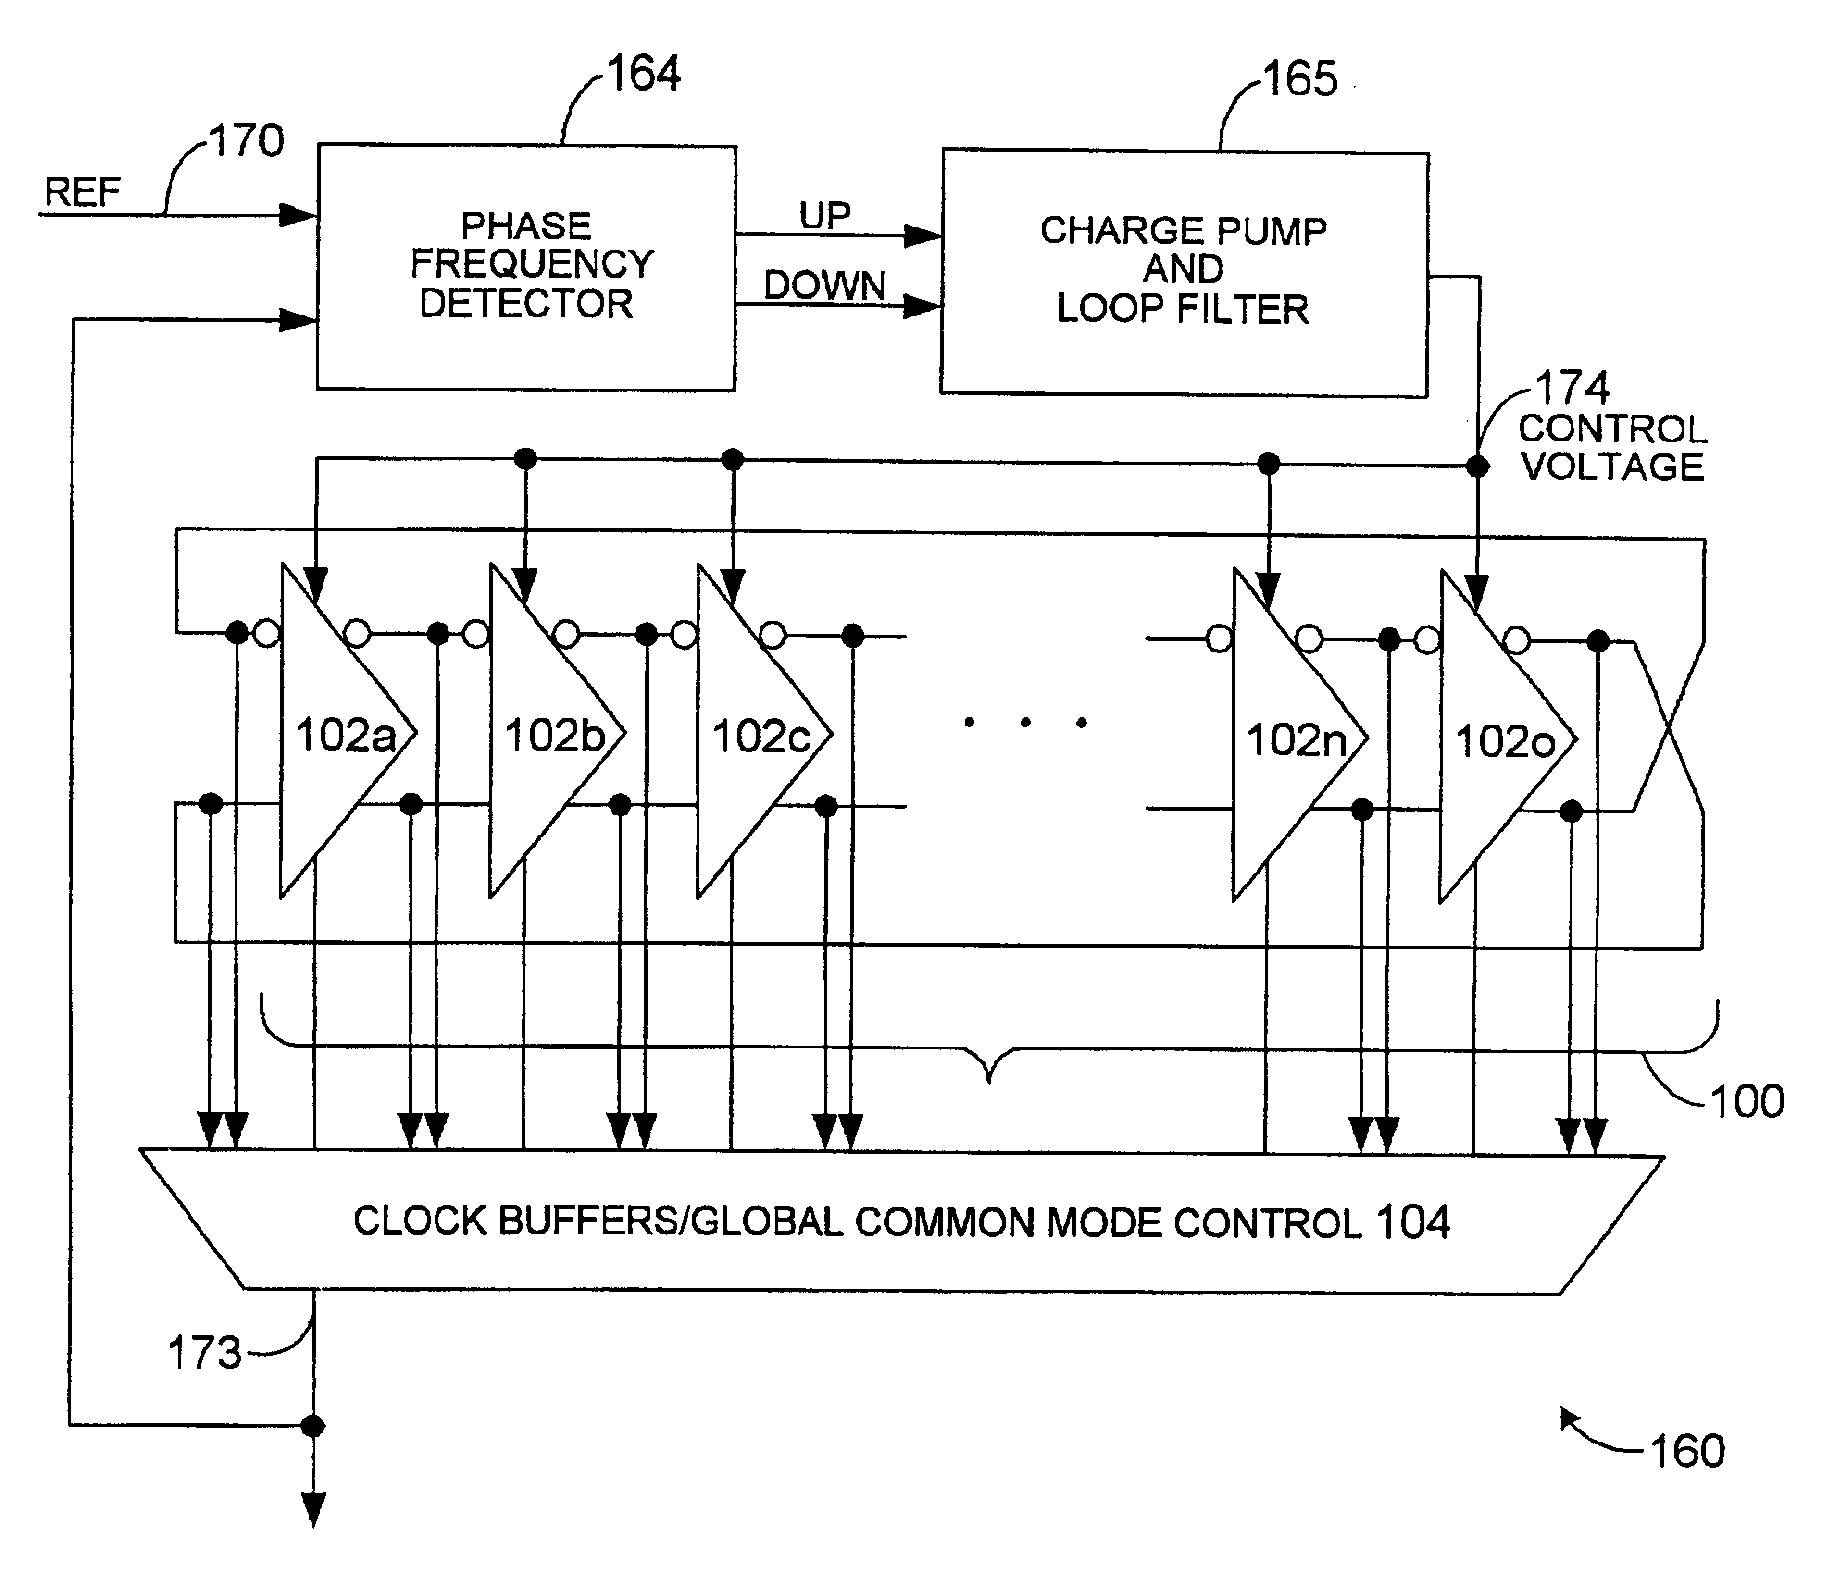 Multi-phase voltage controlled oscillator (VCO) with common mode control